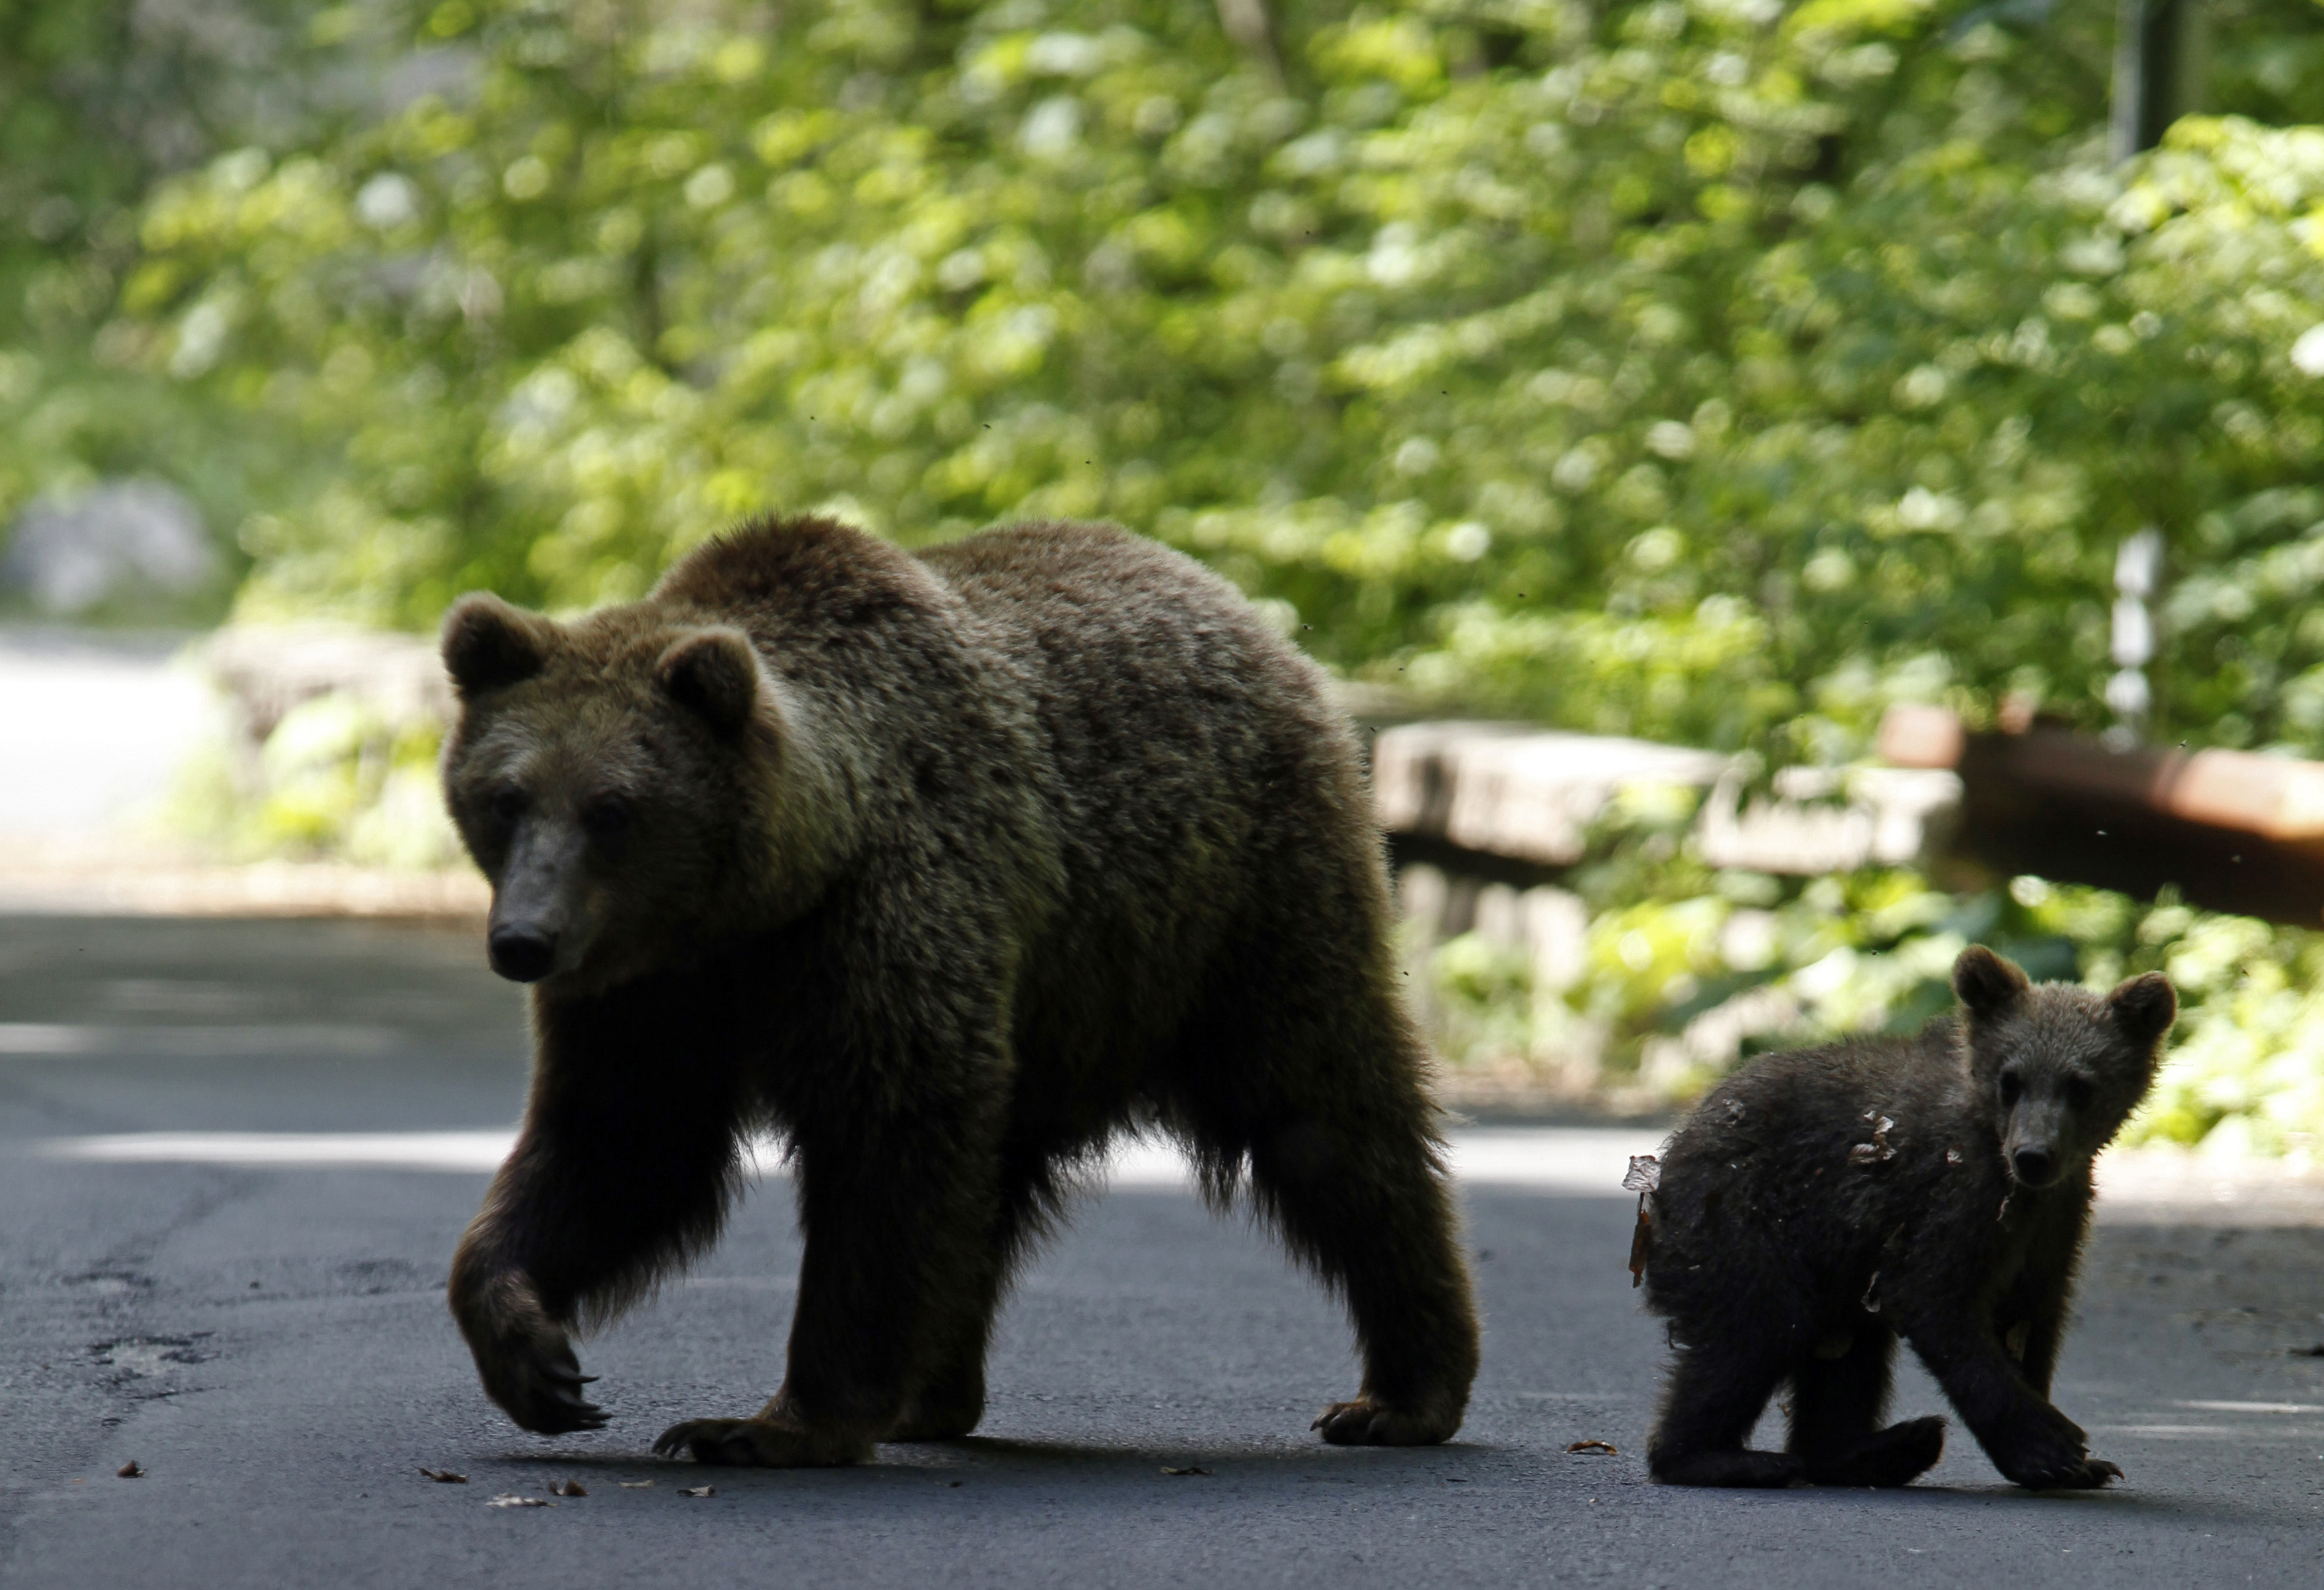 A brown bear and her cub play on the road in the outskirts of Sinaia